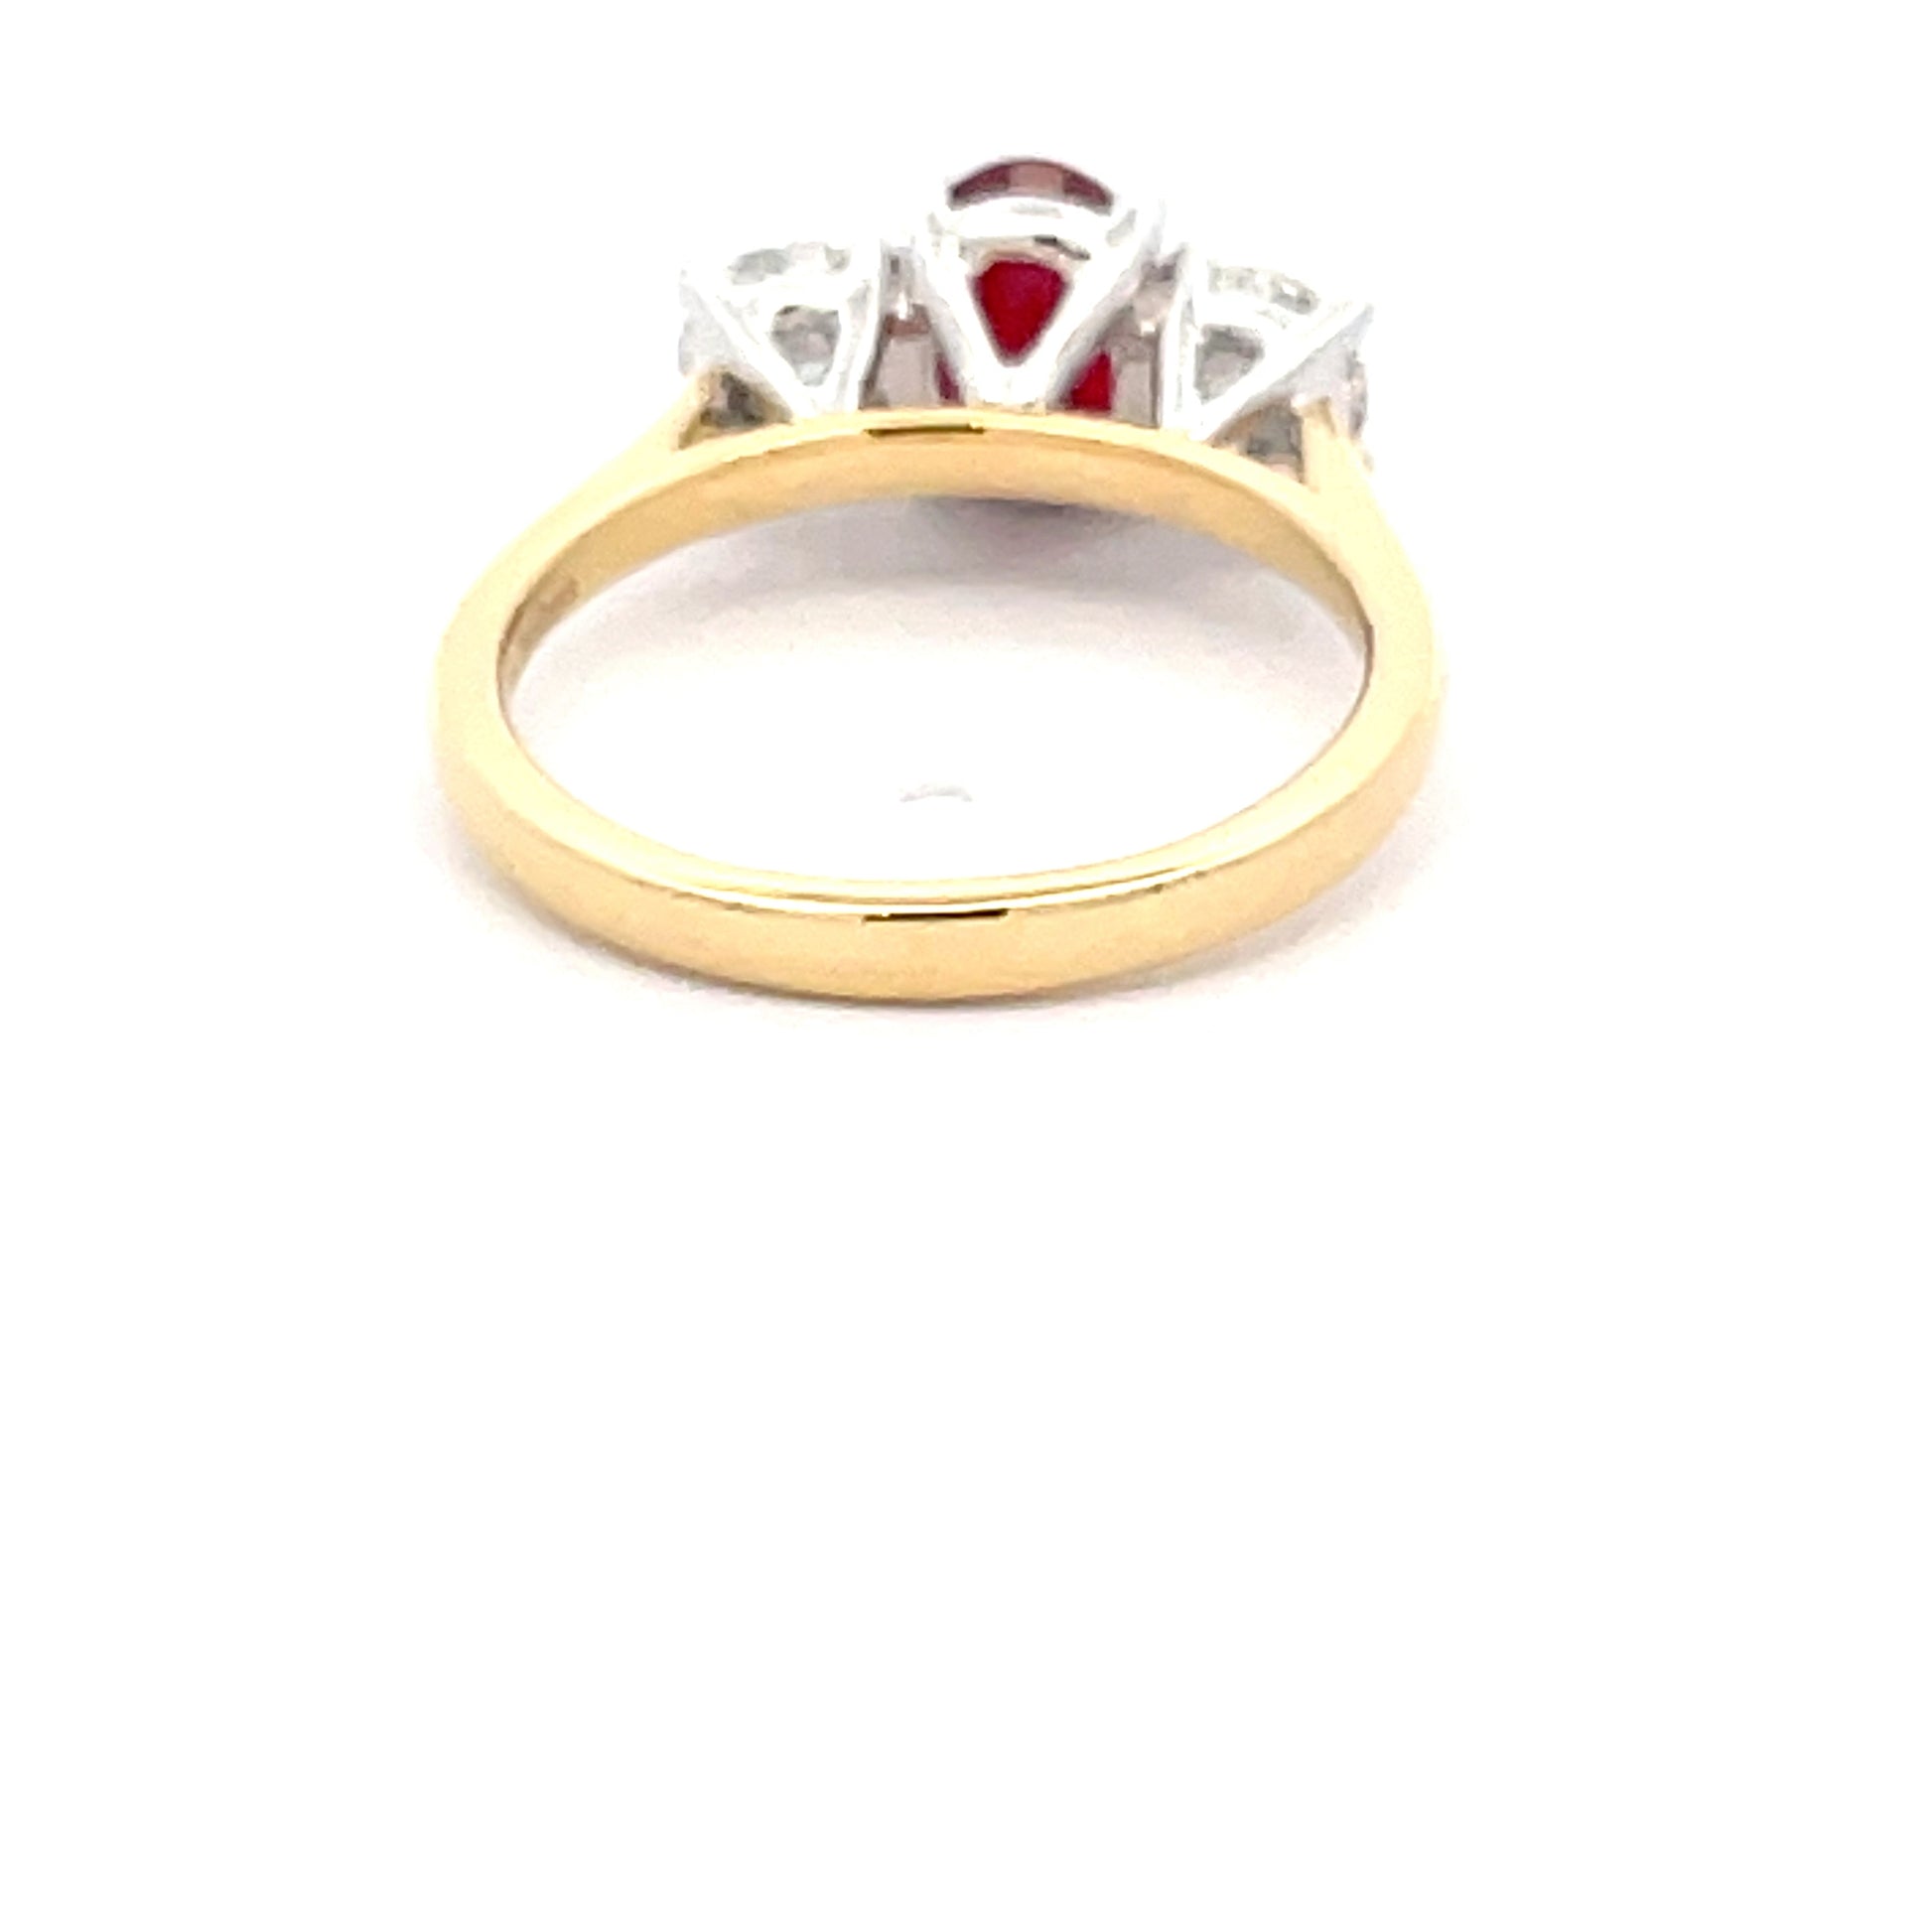 Ruby and Round Brilliant Cut Diamond 3 Stone Ring  Gardiner Brothers   